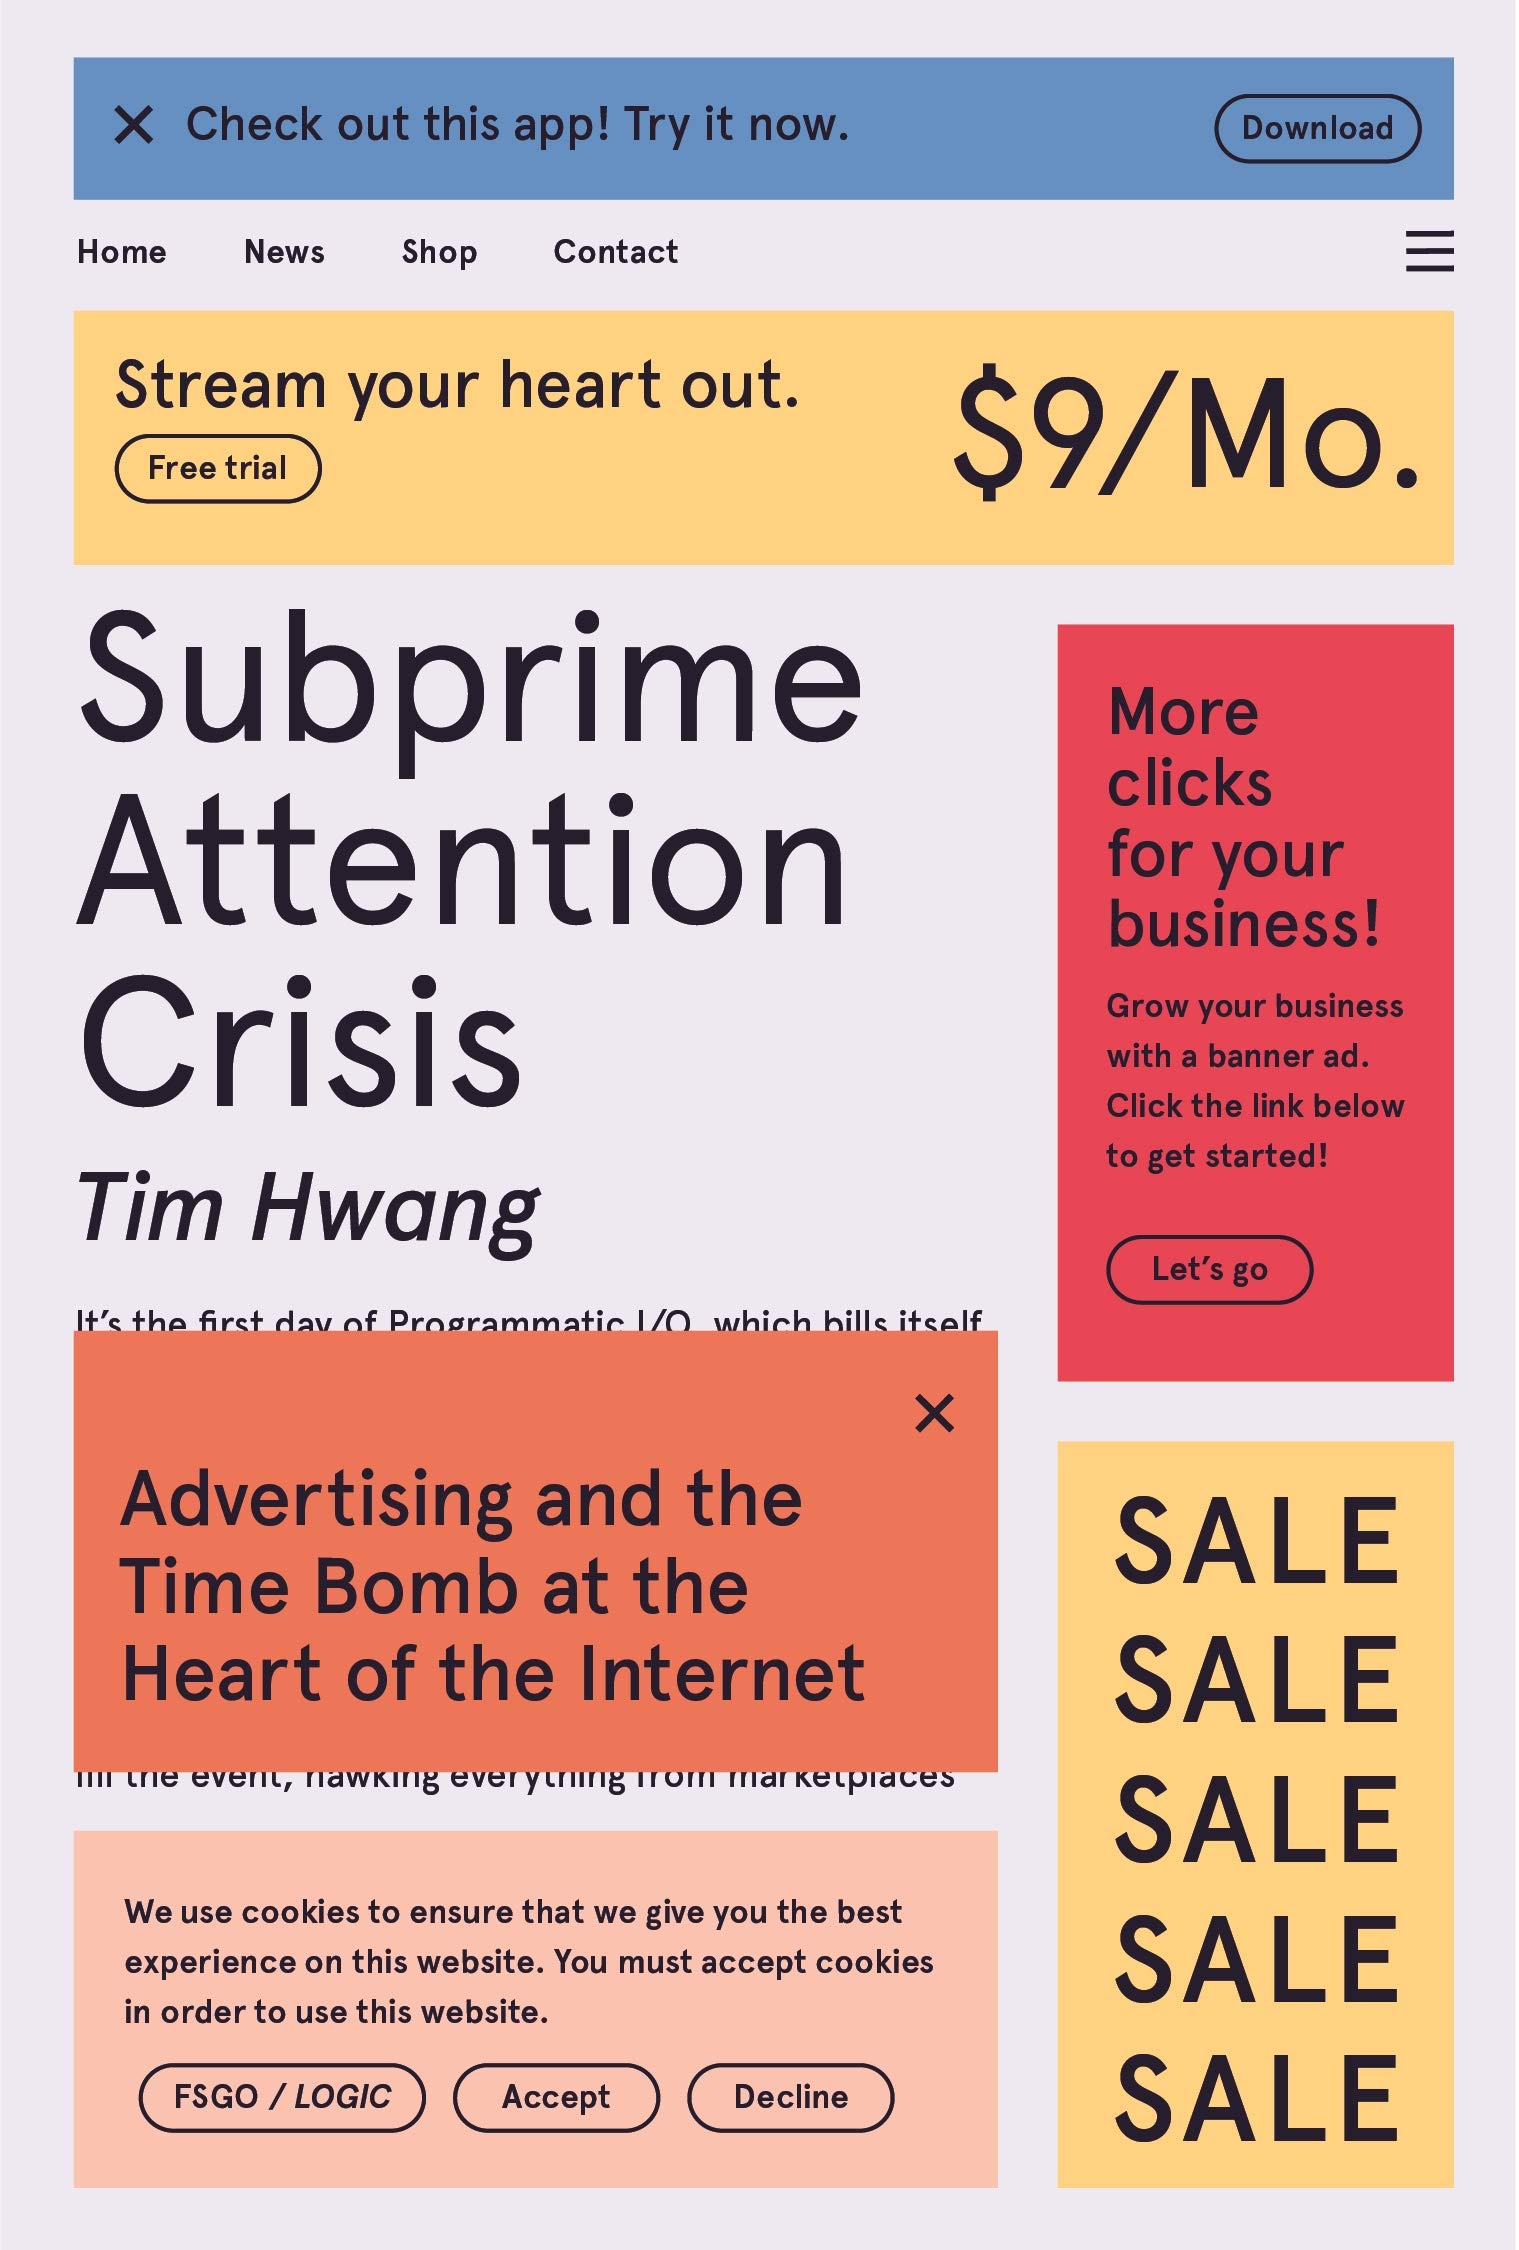 Image for "Subprime Attention Crisis"